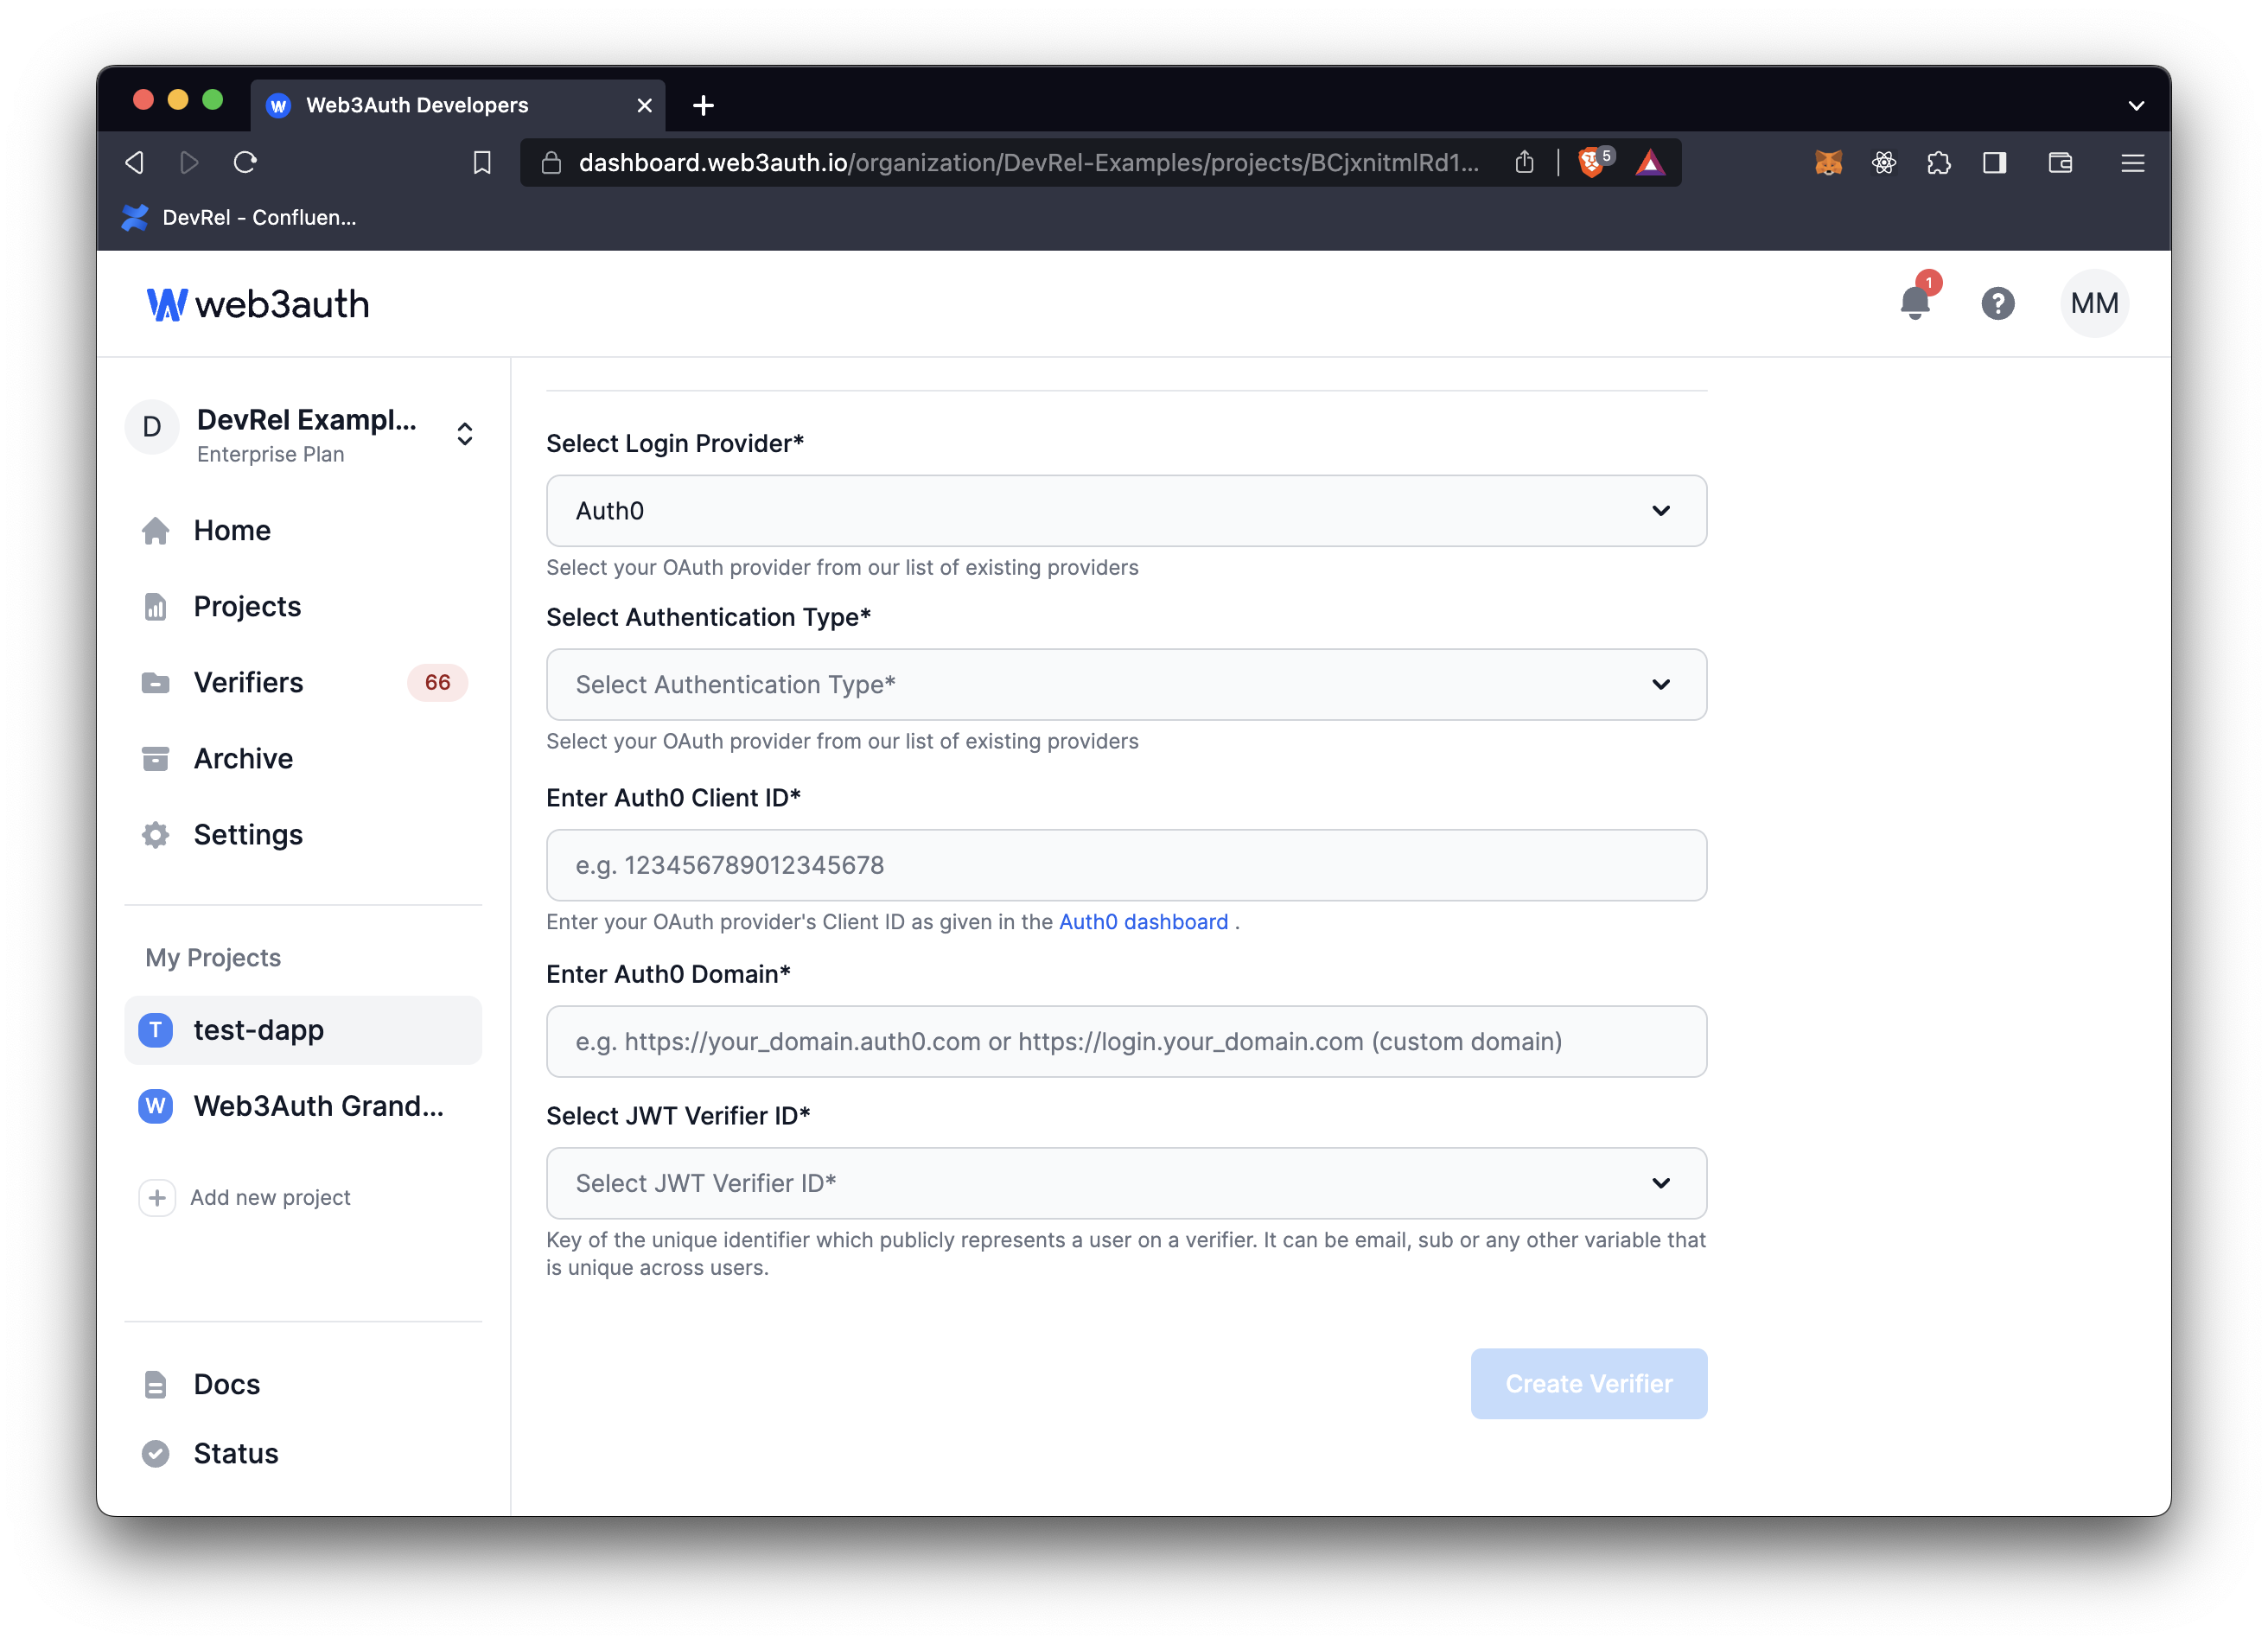 Weibo - Auth0 Client ID and Auth0 Domain on Web3Auth Dashboard